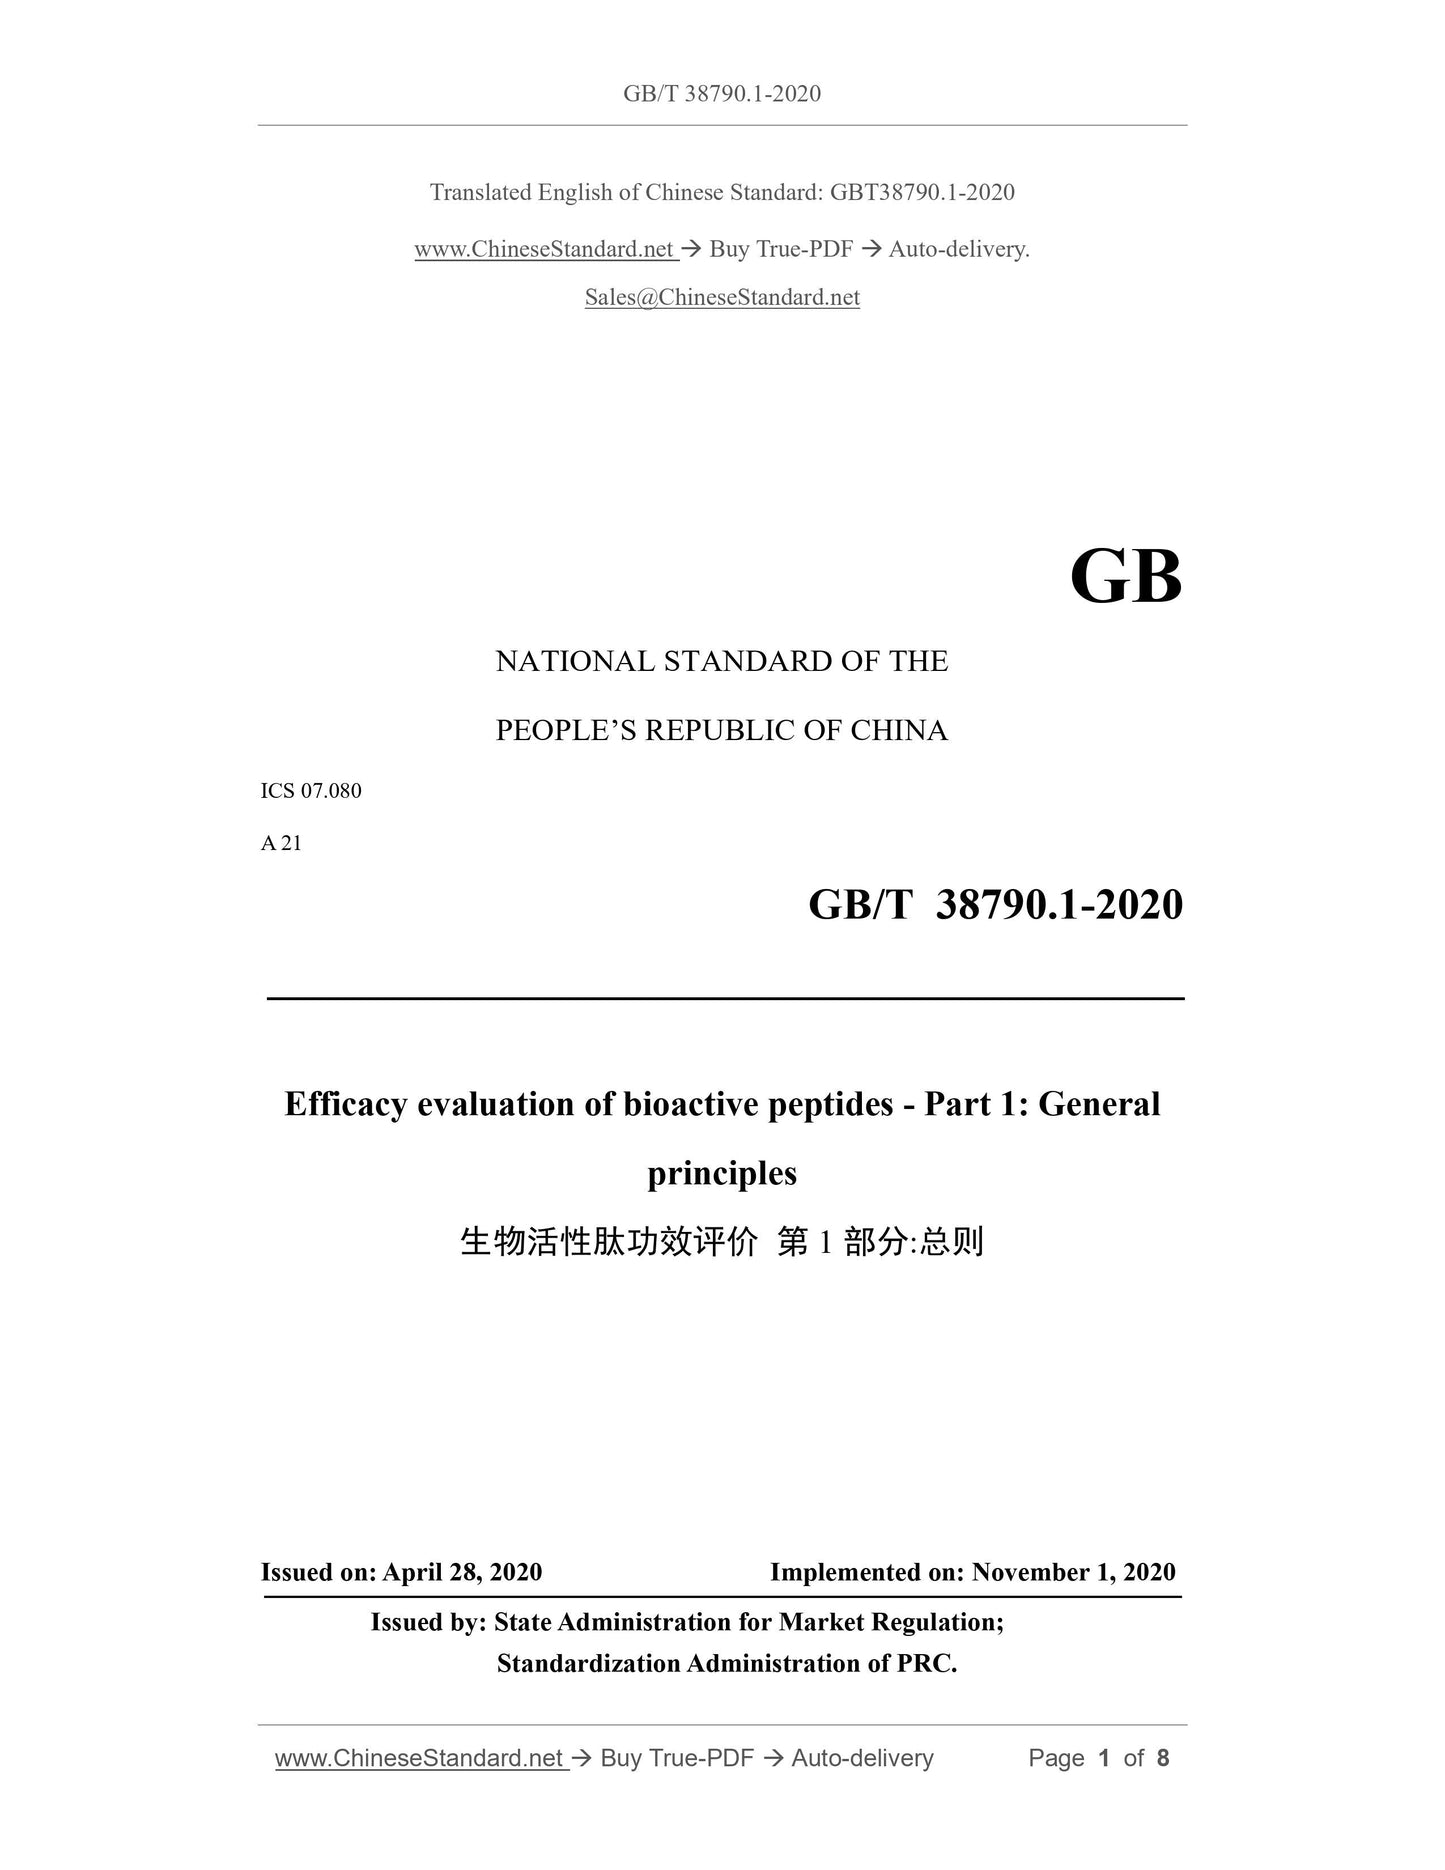 GB/T 38790.1-2020 Page 1